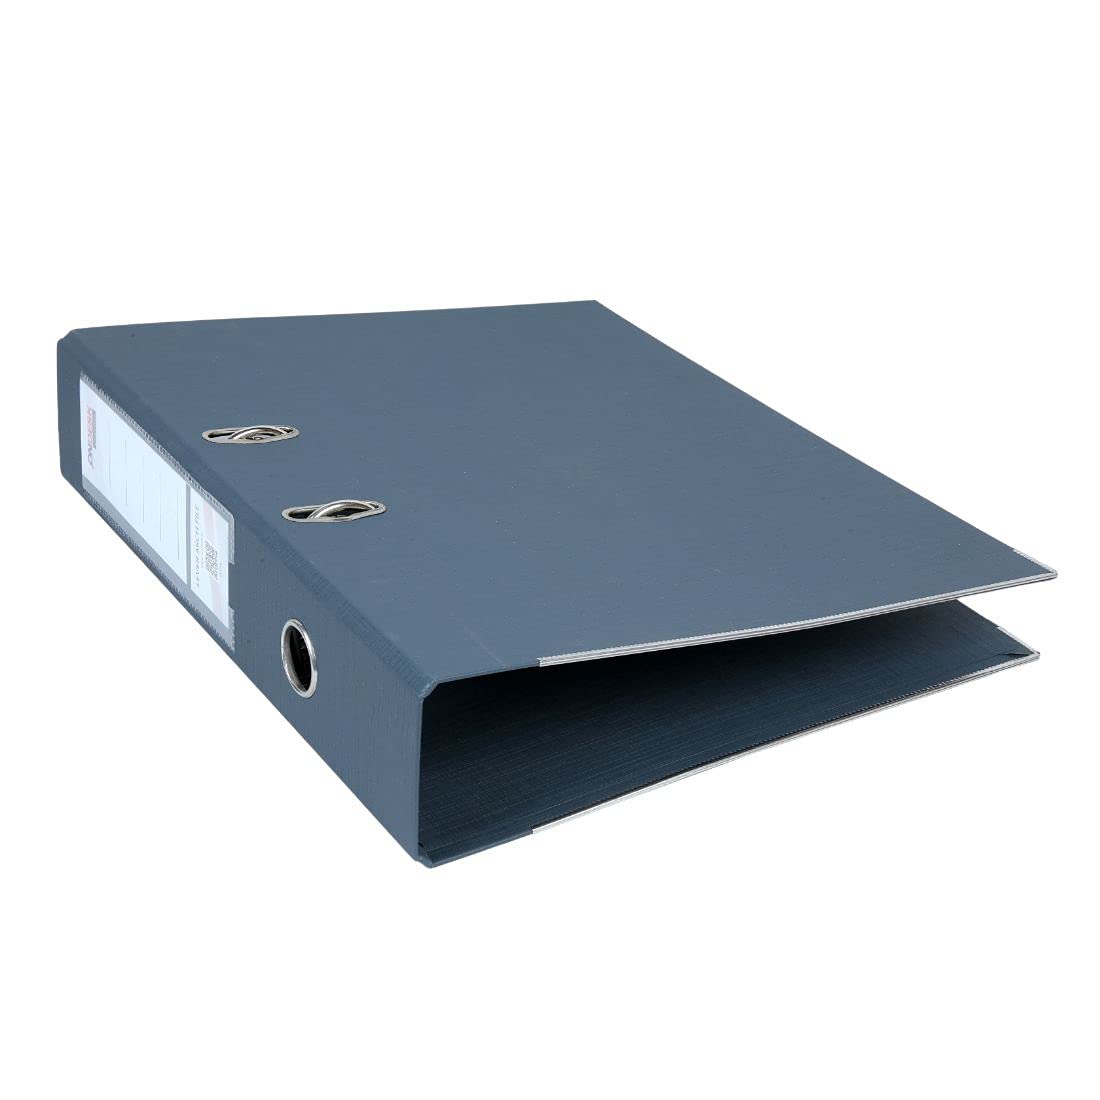 Ondesk Essentials FC 3" Lever Arch Box PVC File (Blue & Grey, Pack of 6) - Color May Vary